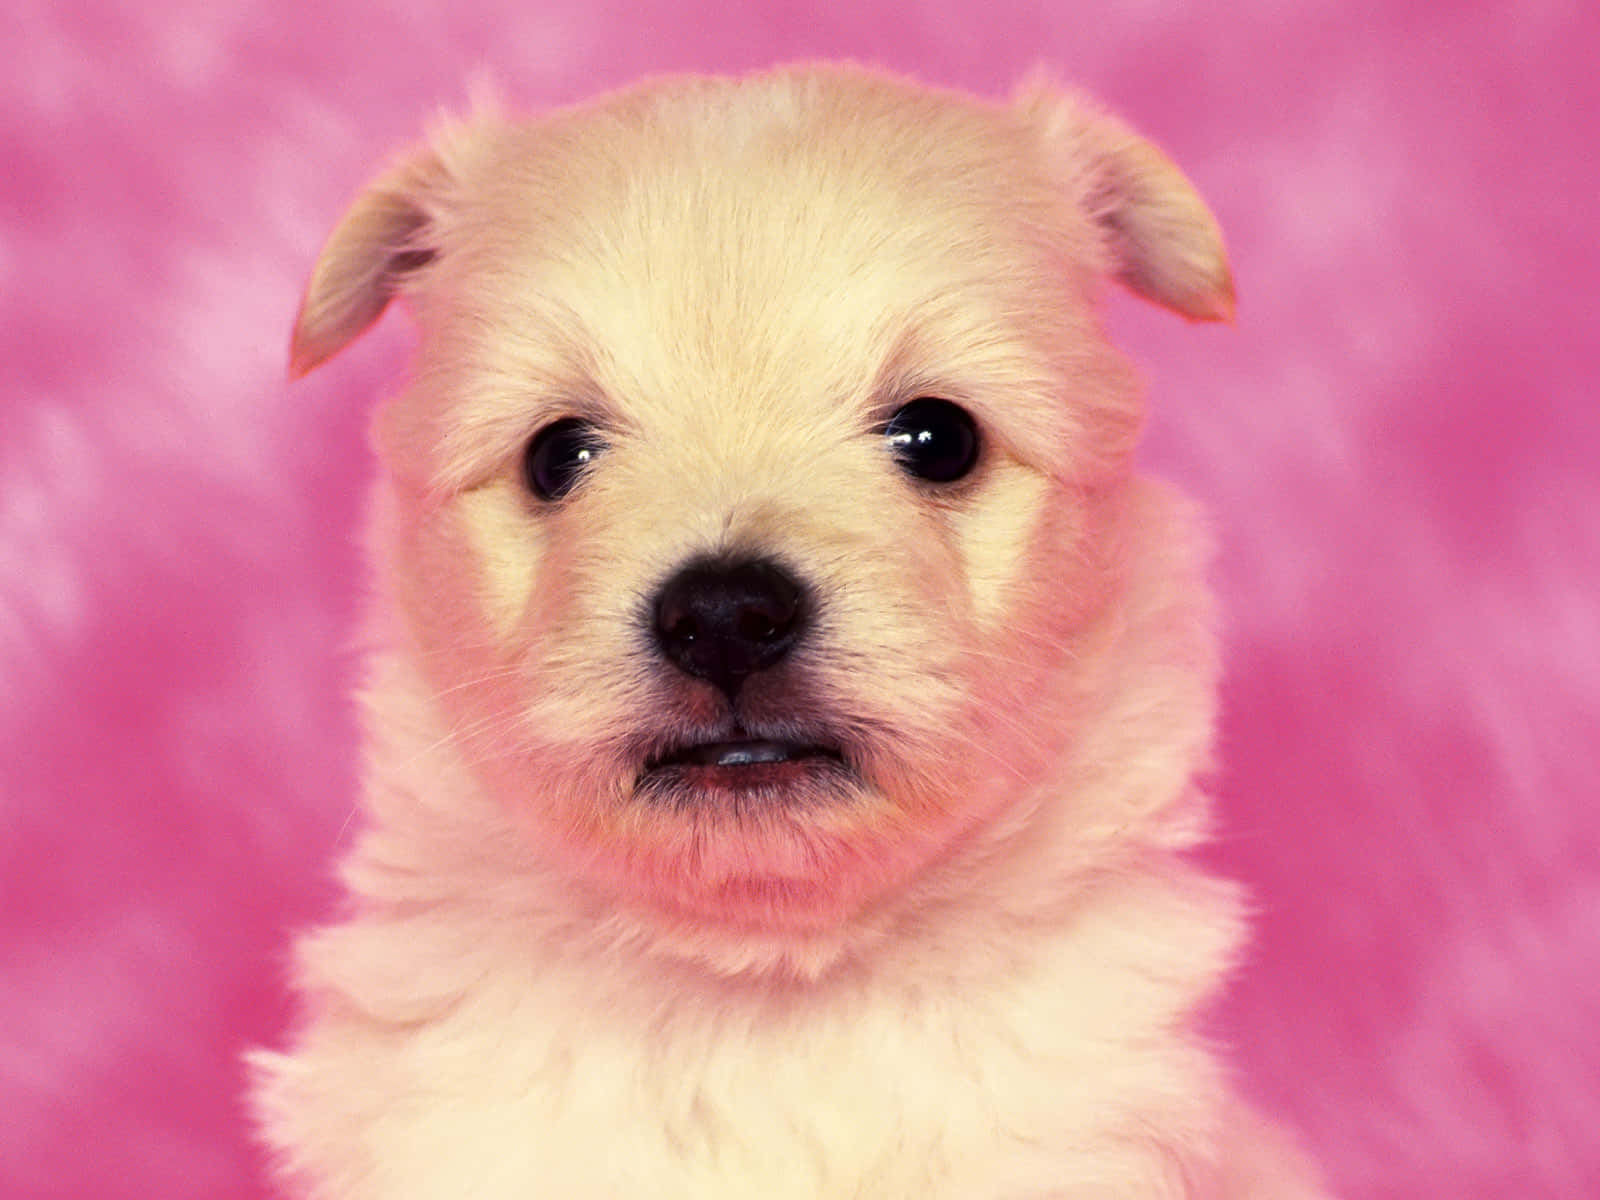 Adorable Pink Puppies Playing on a Carpet Wallpaper